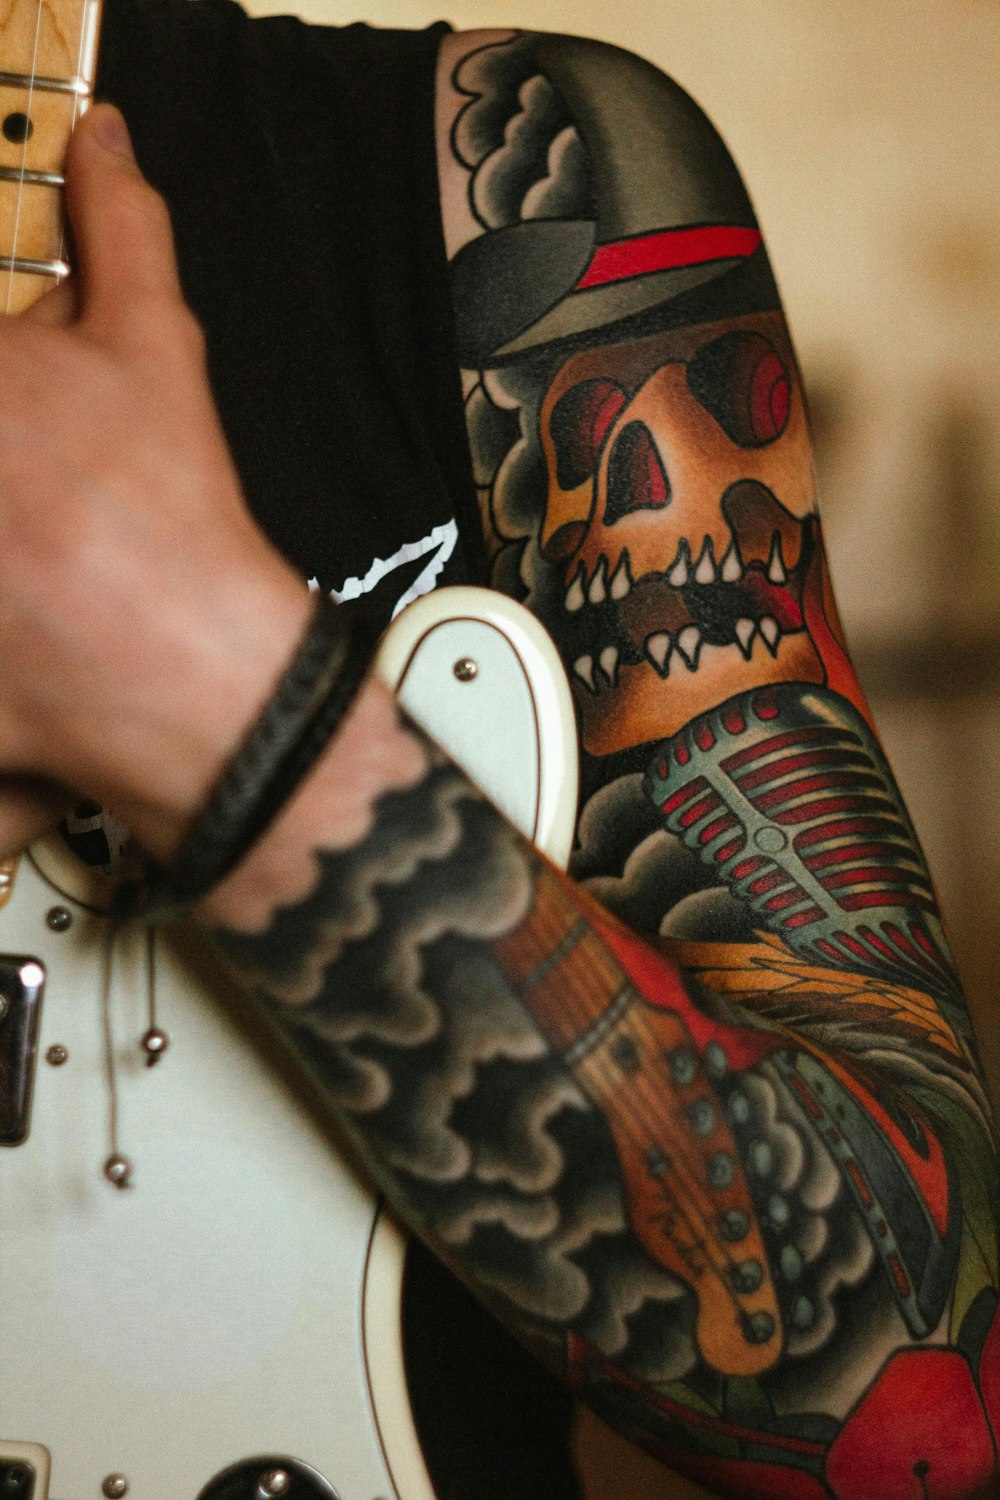 a man with a tattoo on his arm holding a guitar